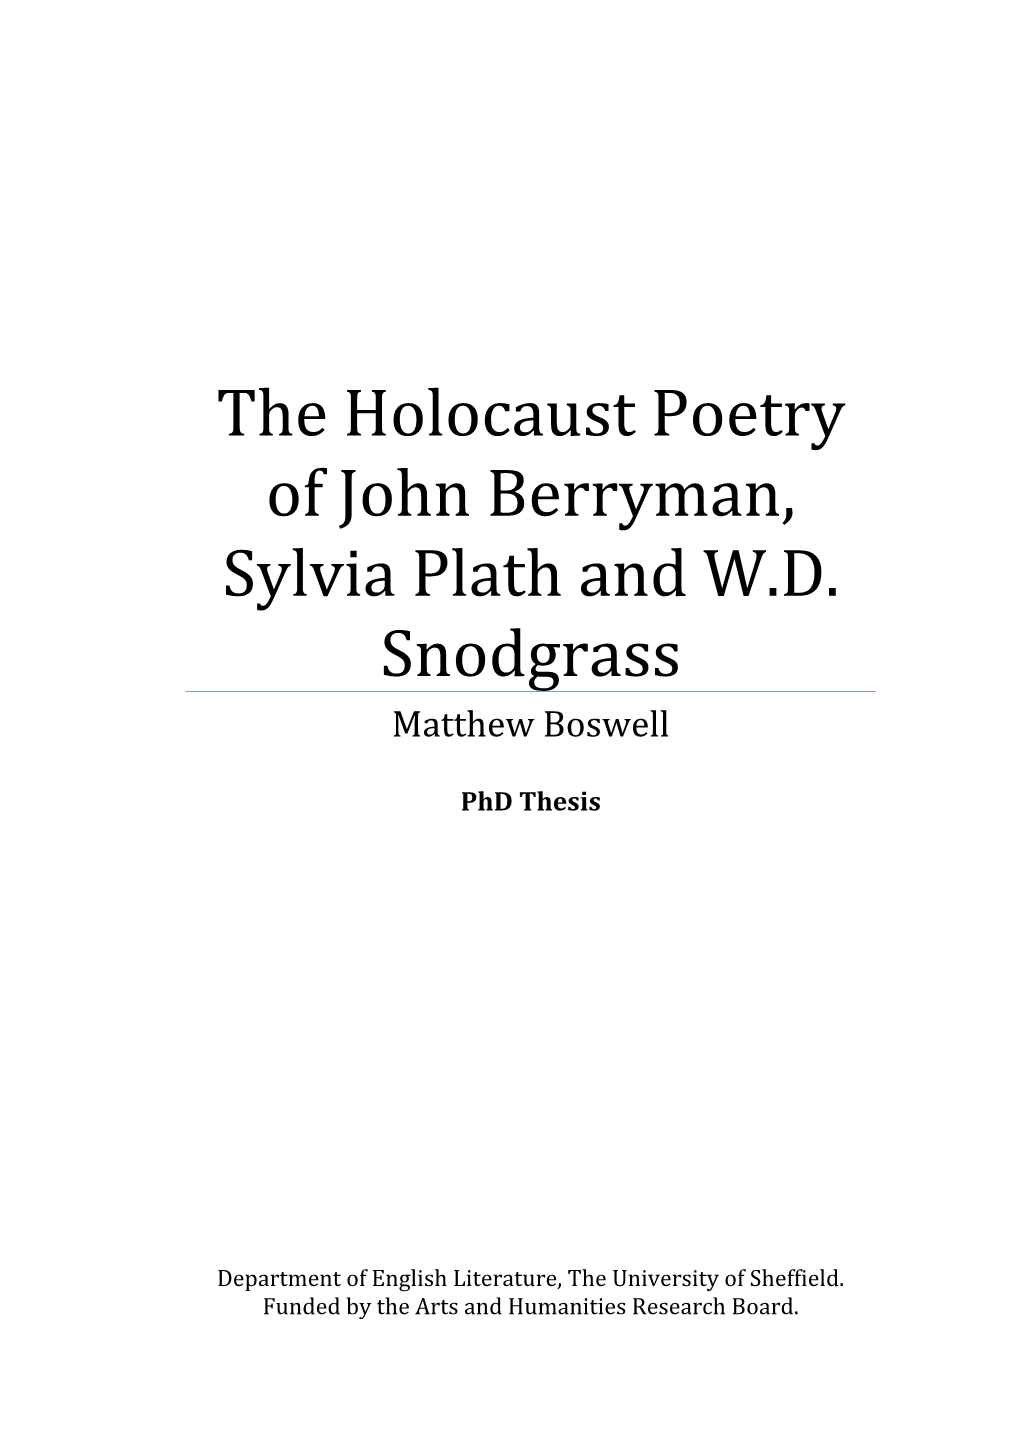 The Holocaust Poetry of John Berryman, Sylvia Plath and W.D. Snodgrass Matthew Boswell